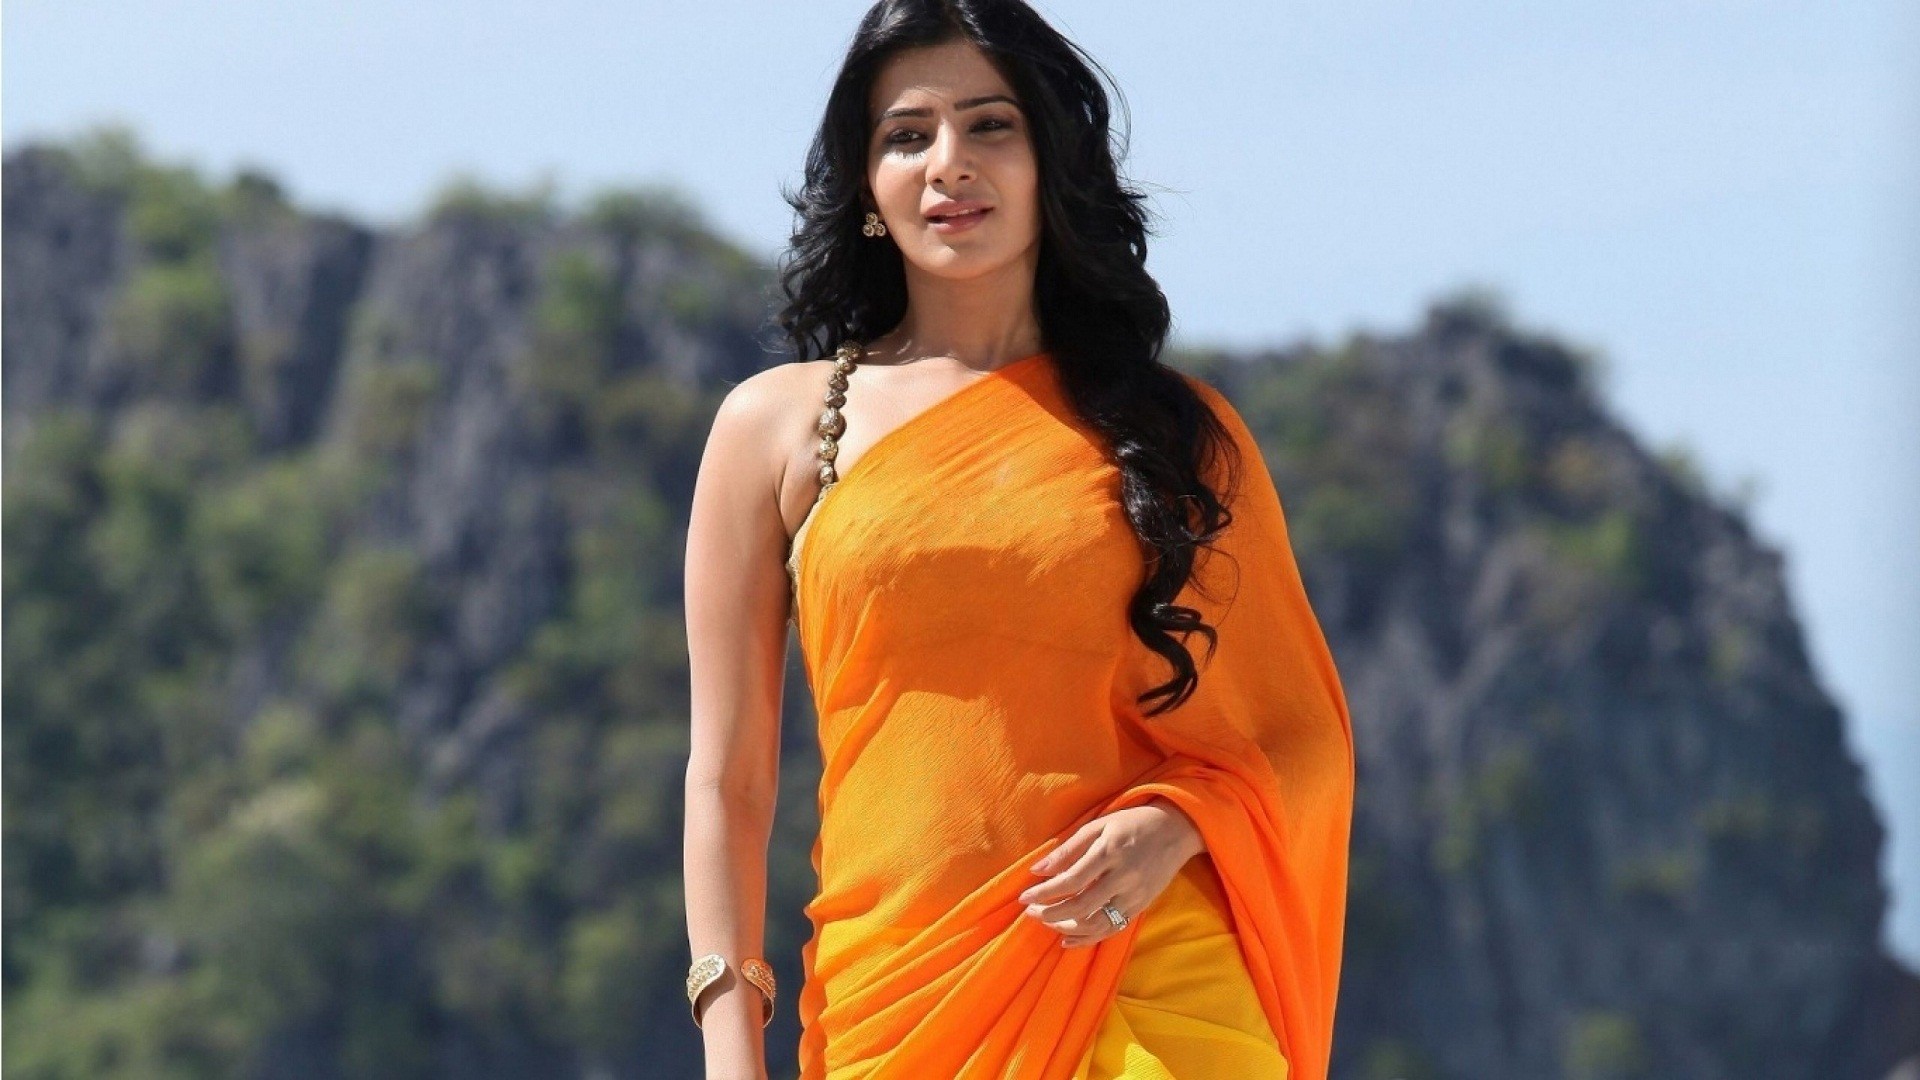 Sauth actresses ful hd wallpapers